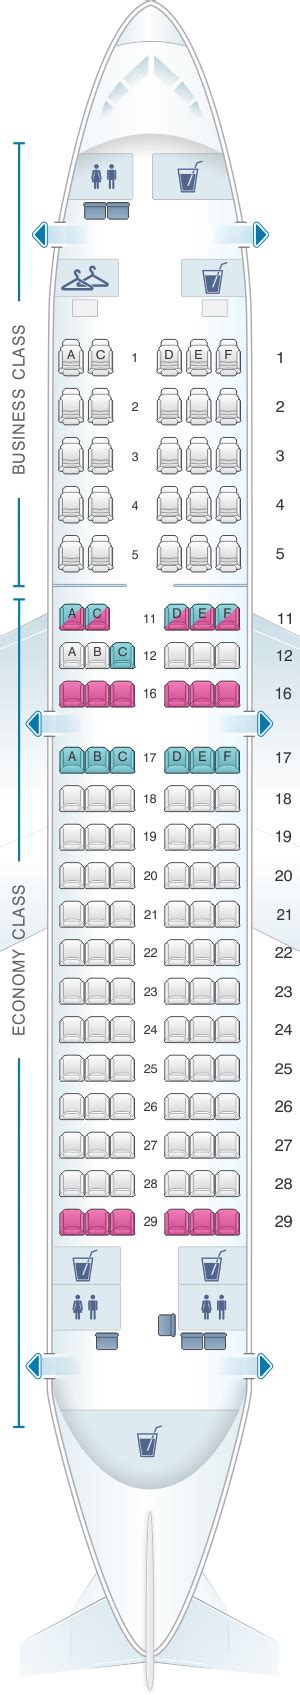 Seat Map South African Airways Airbus A319 100